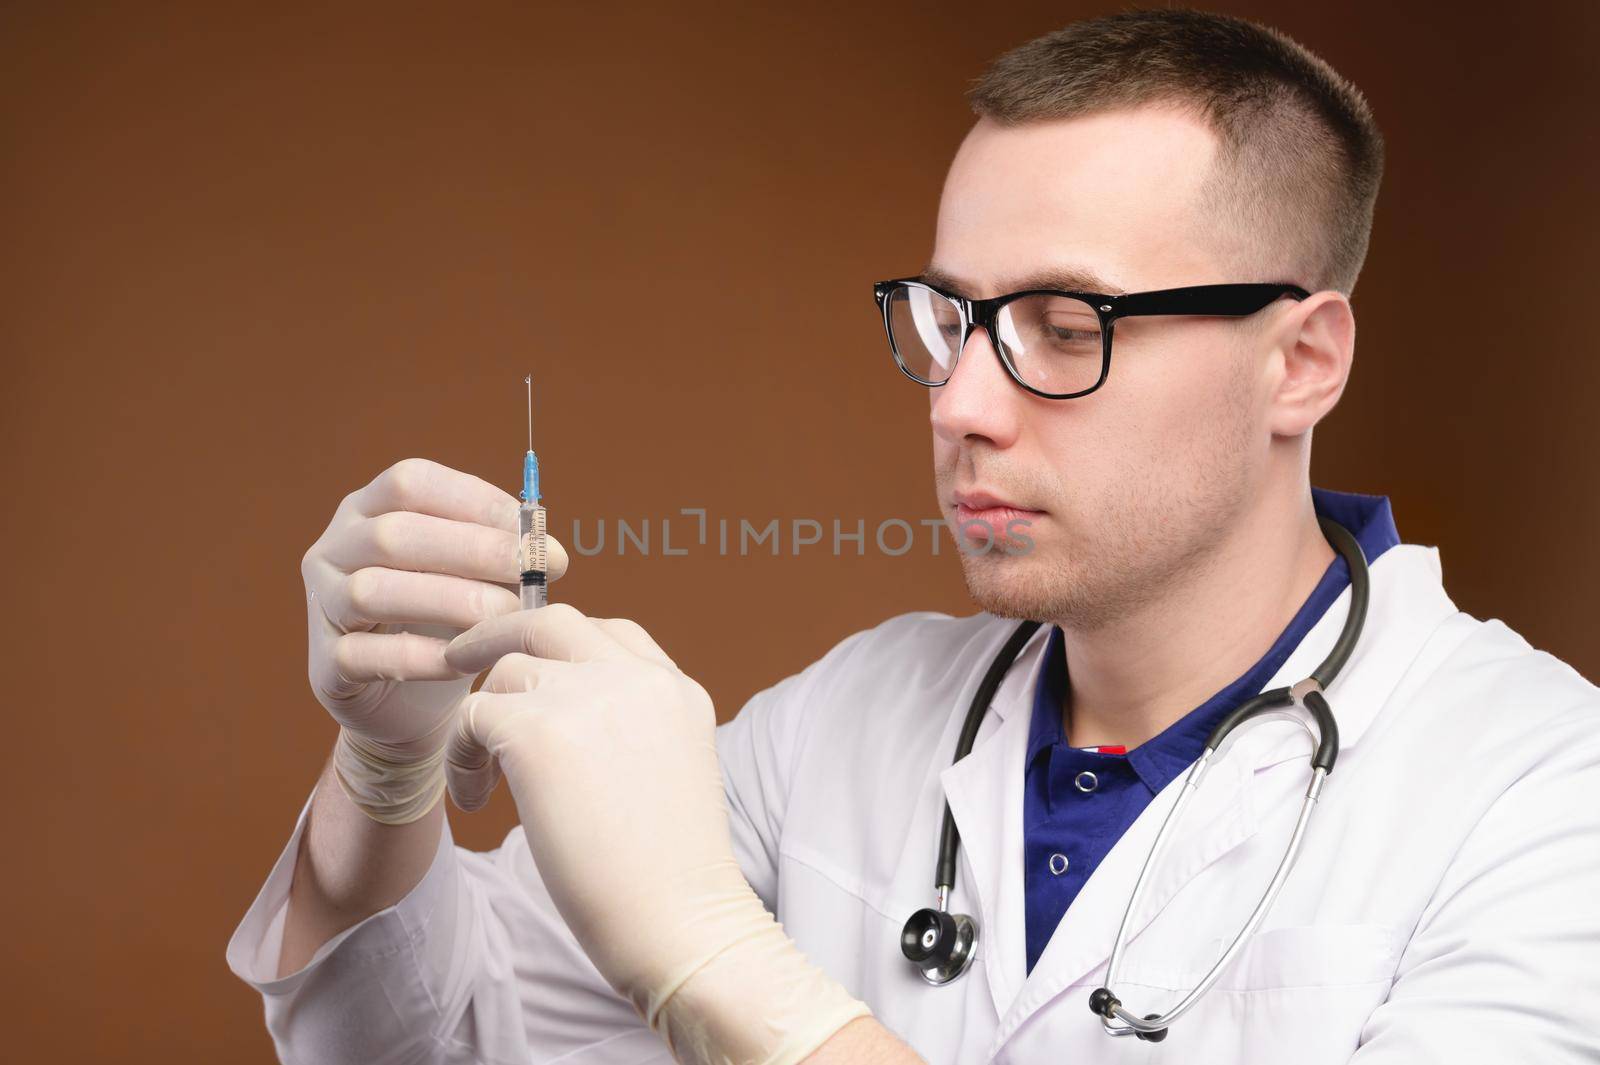 Young caucasian doctor man preparing to do a vaccination with a syringe. Studio shot on a brown background. Release air from the syringe before the injection.